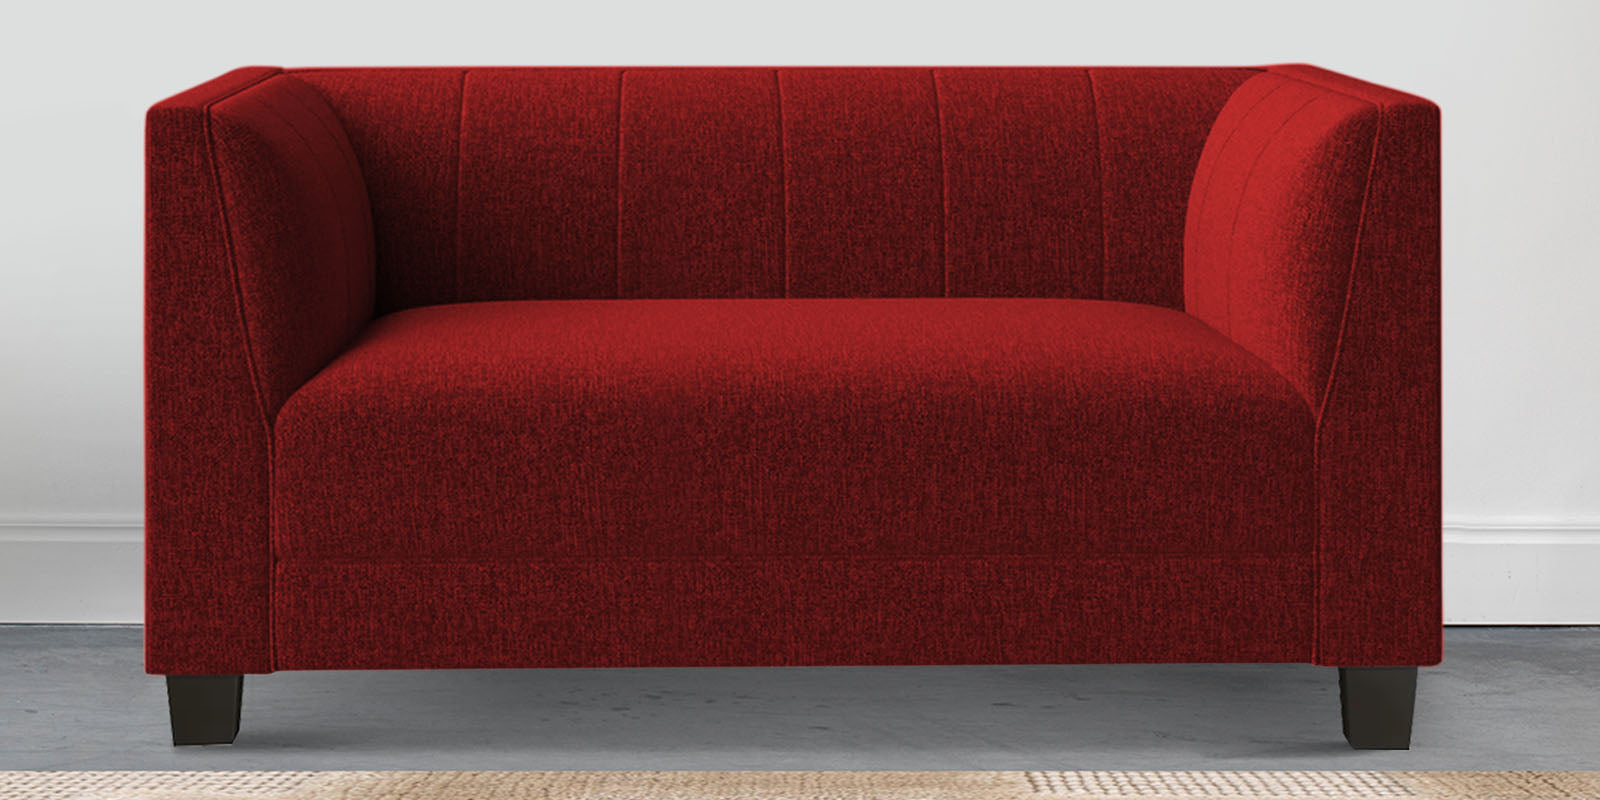 Chastin Fabric 2 Seater Sofa in Blood Maroon Colour